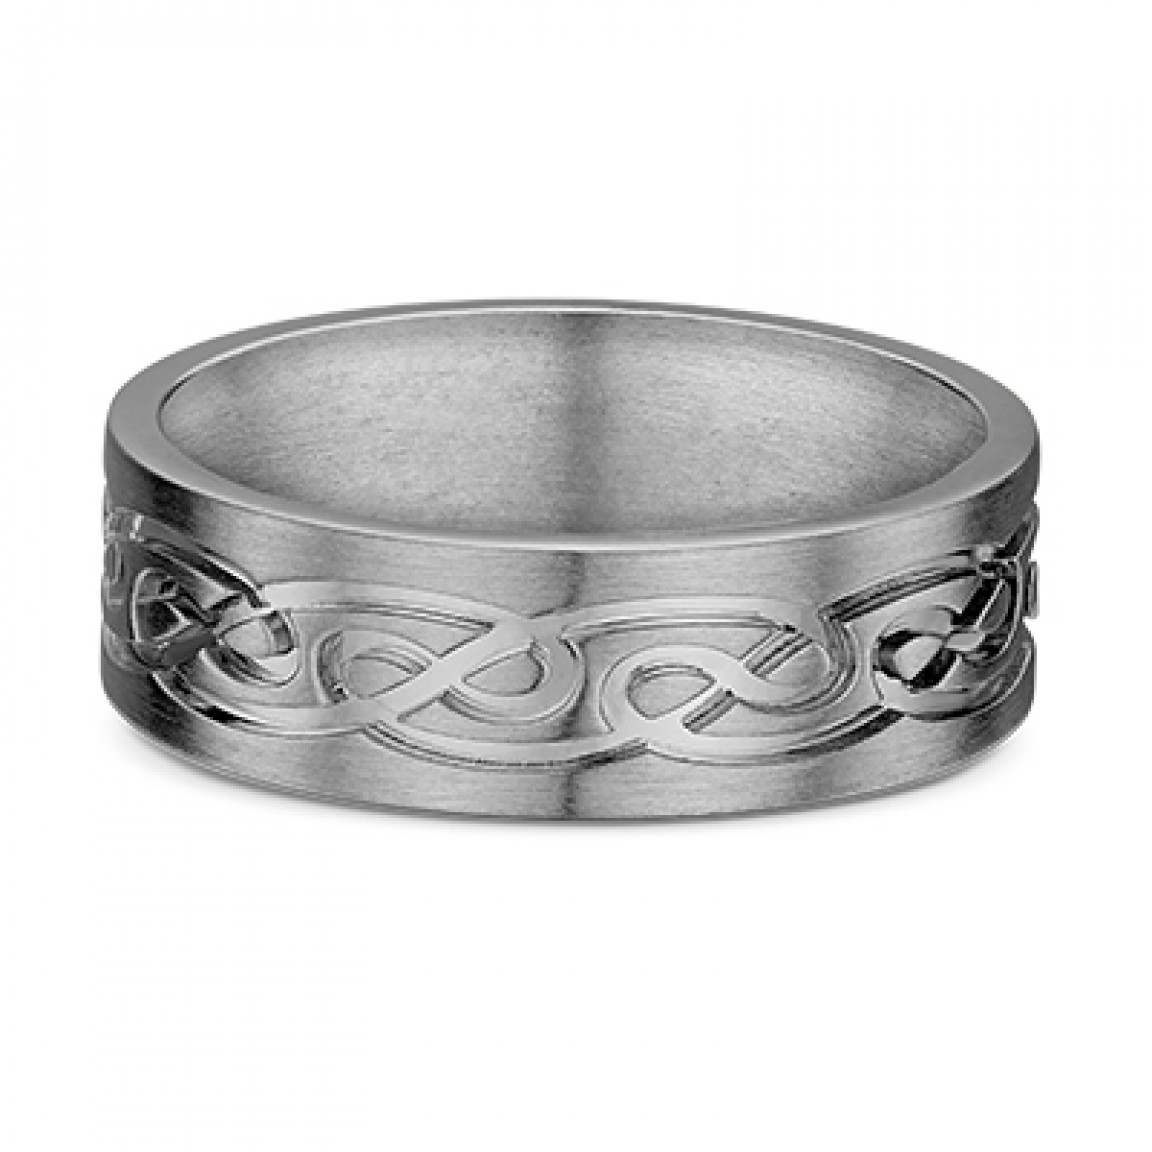 8mm Stainless Steel Vintage Style Celtic Knot Wave Wedding Band Ring 